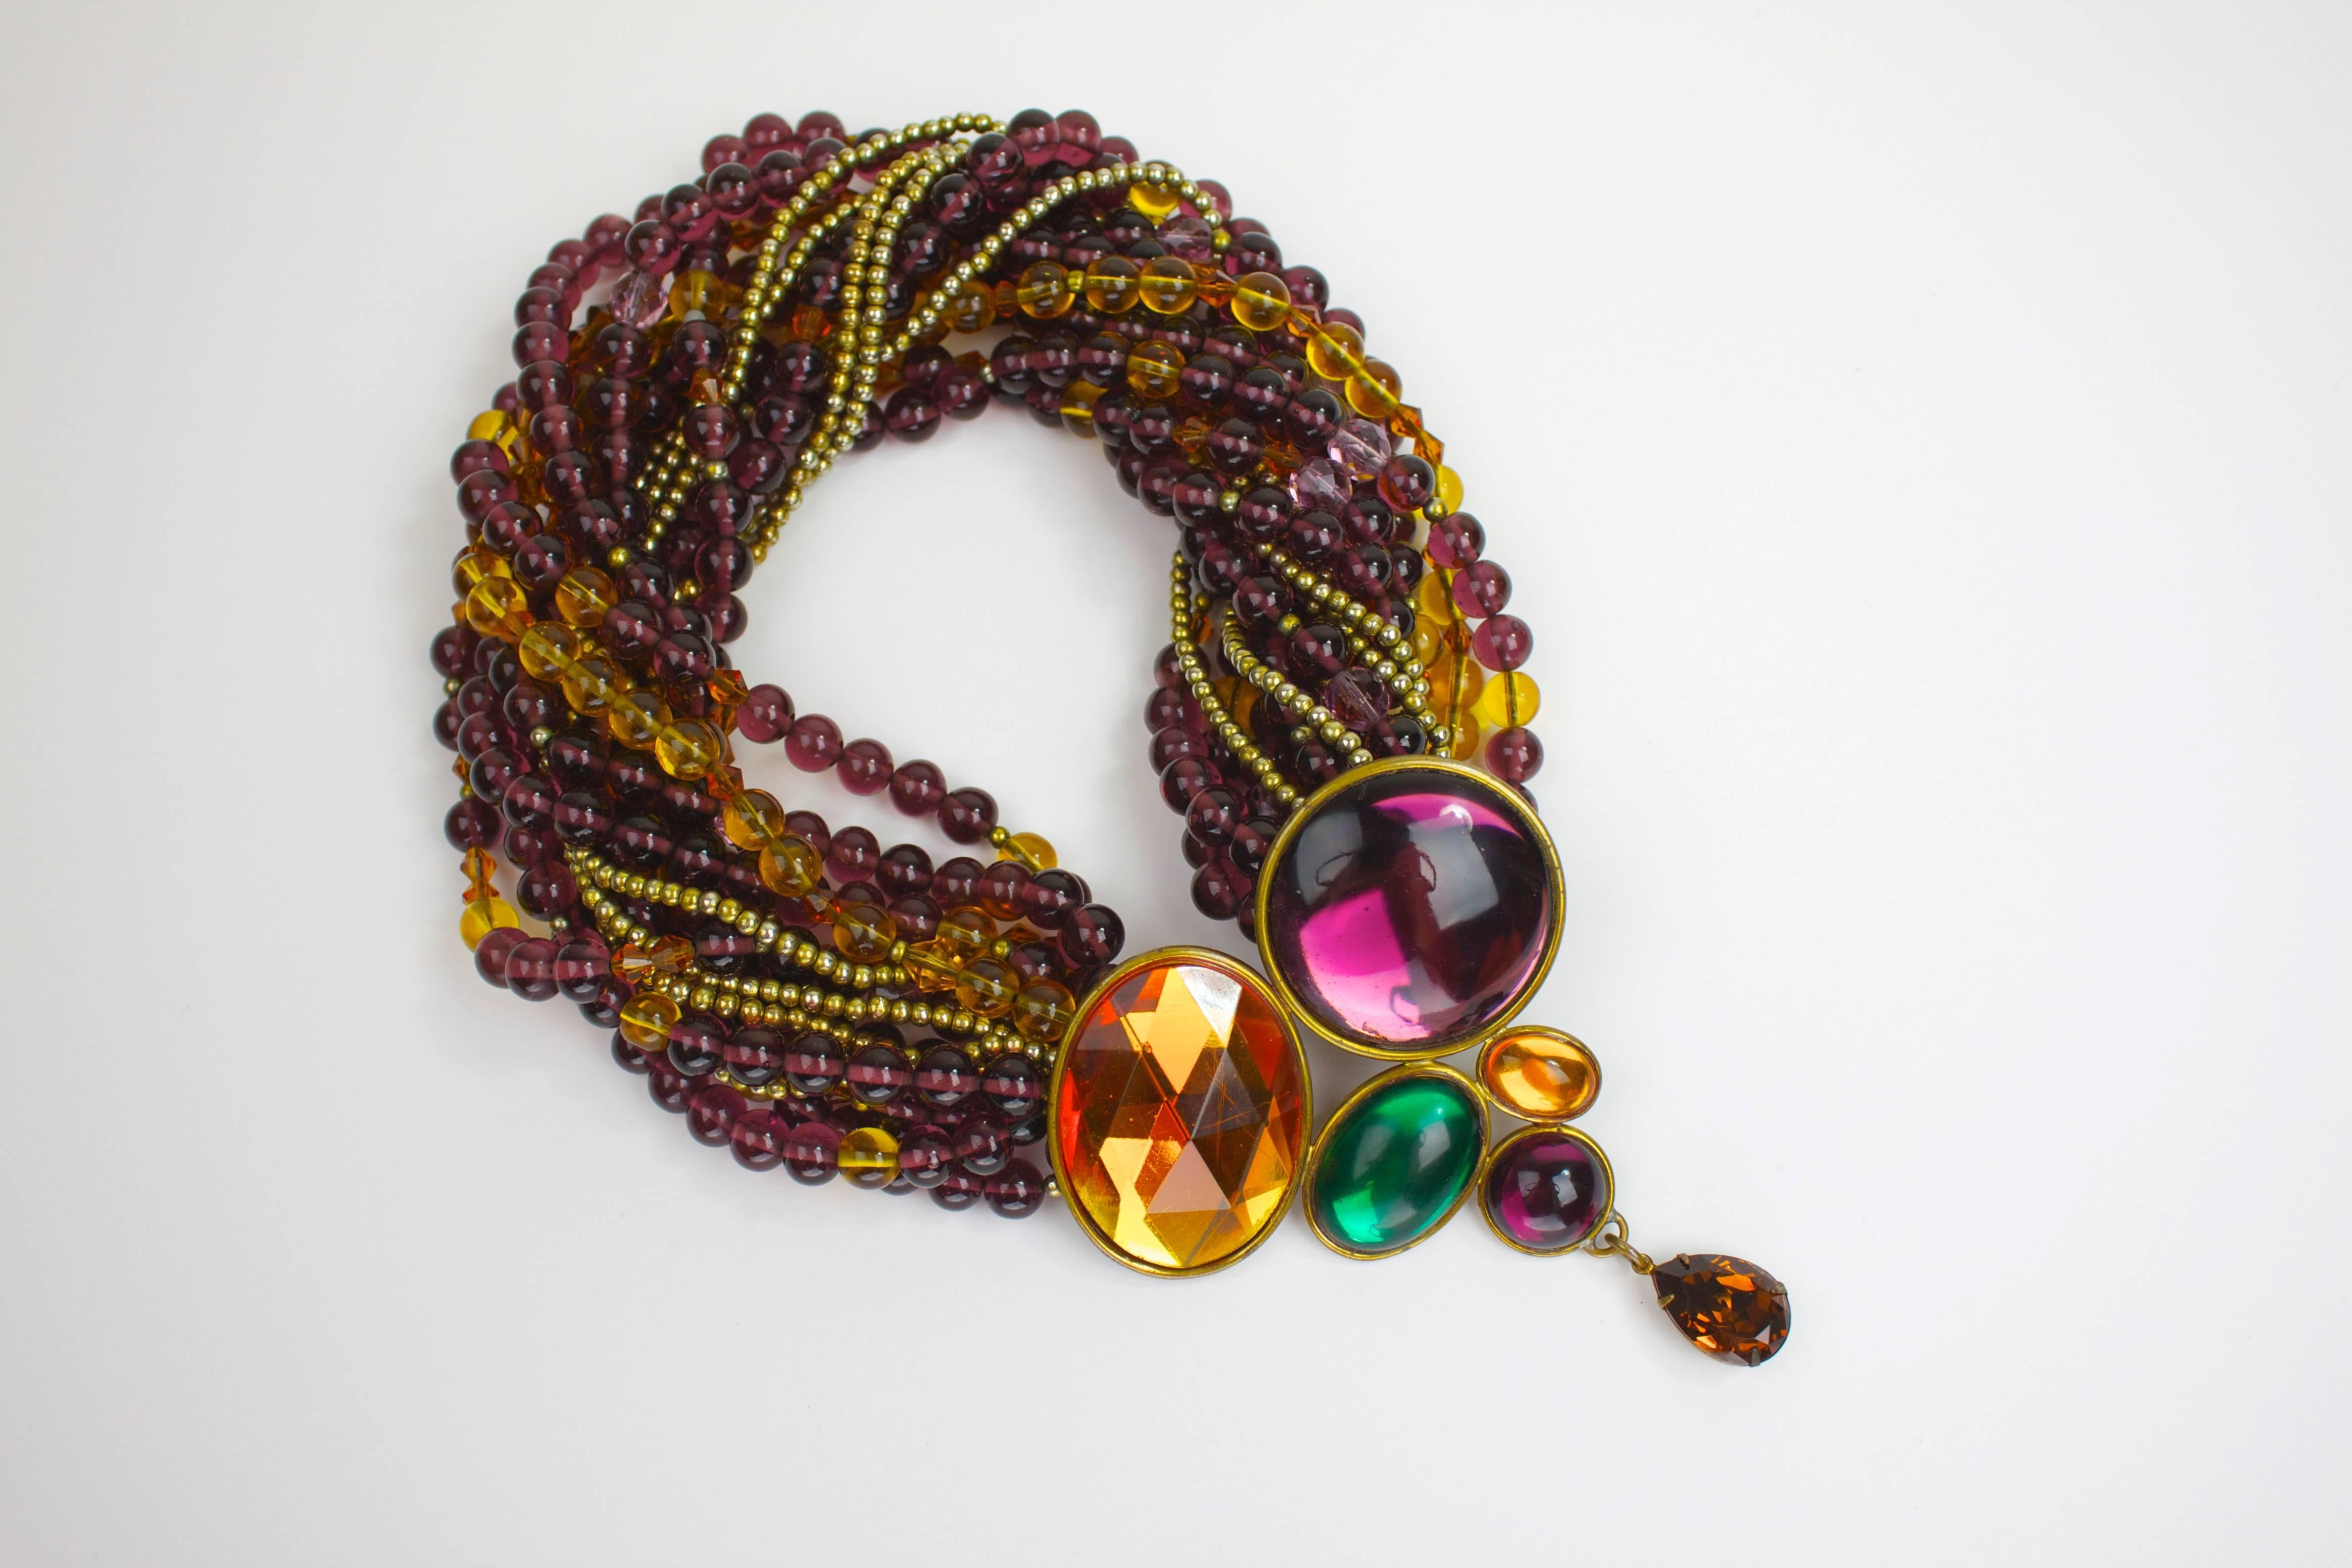 Known for her gorgeous art-to-wear creations for the runways of Oscar De La Renta and Bill Blass, Tess Sholom crafts some of the most gorgeous statement pieces to complement and finish ensembles.

This multistrand necklace--featuring plum, amber,